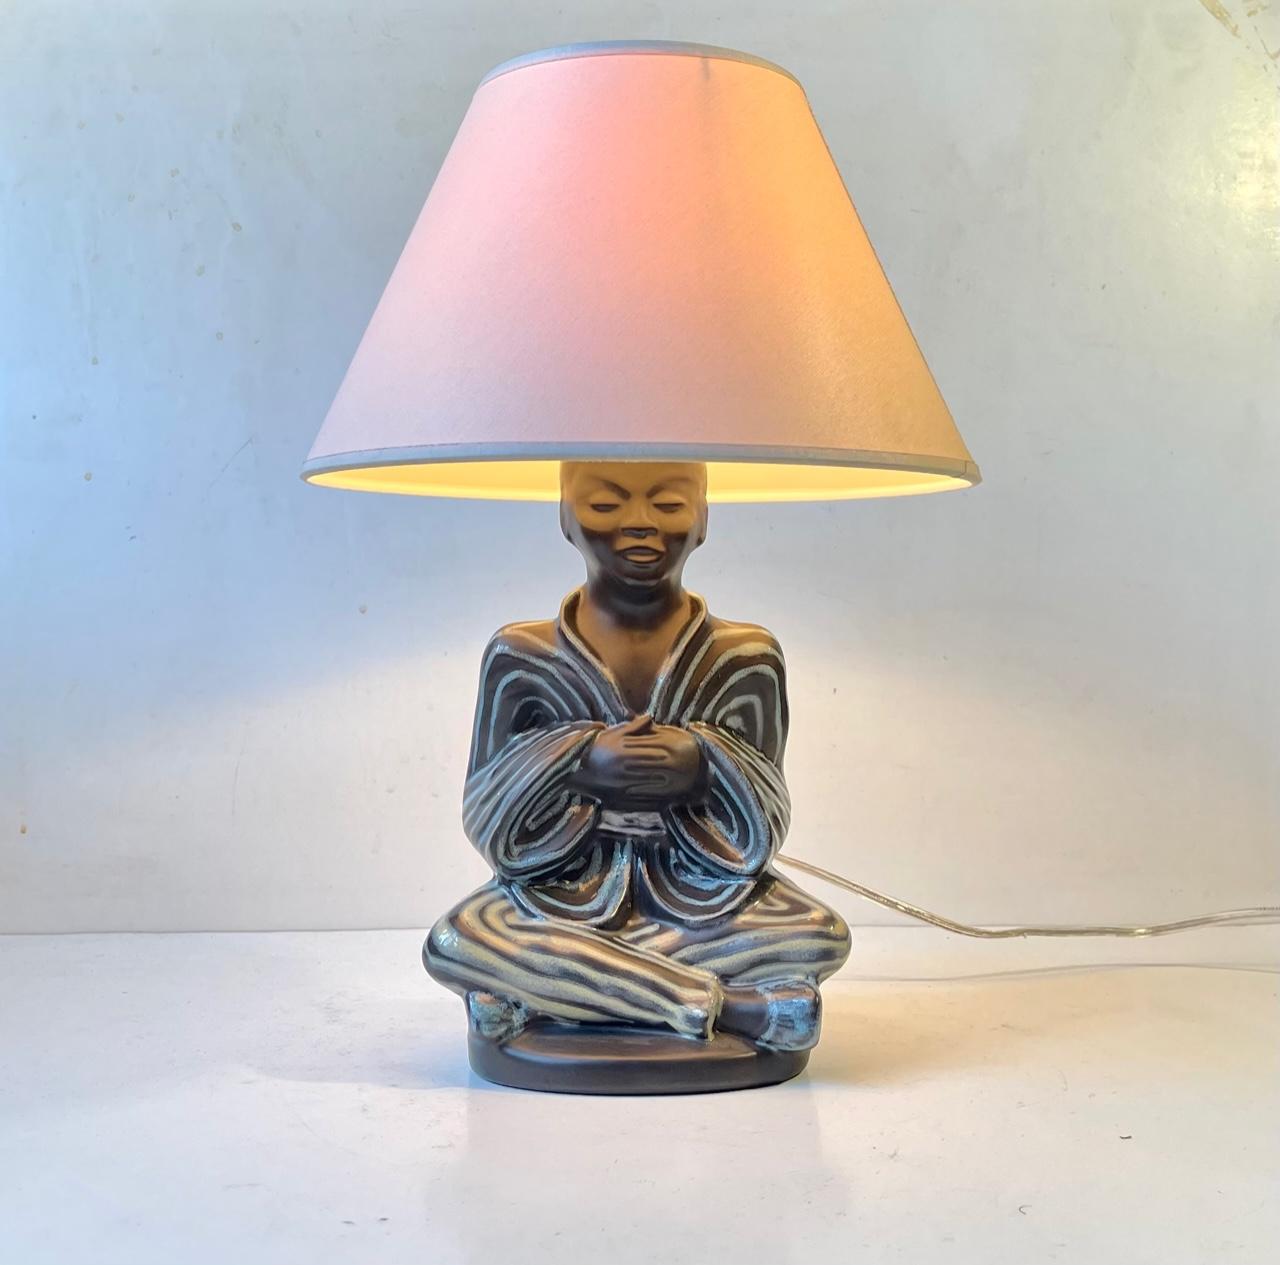 Vintage Black Buddha Table Lamp with Pastel Glazes by Søholm, Danish 1960s For Sale 5